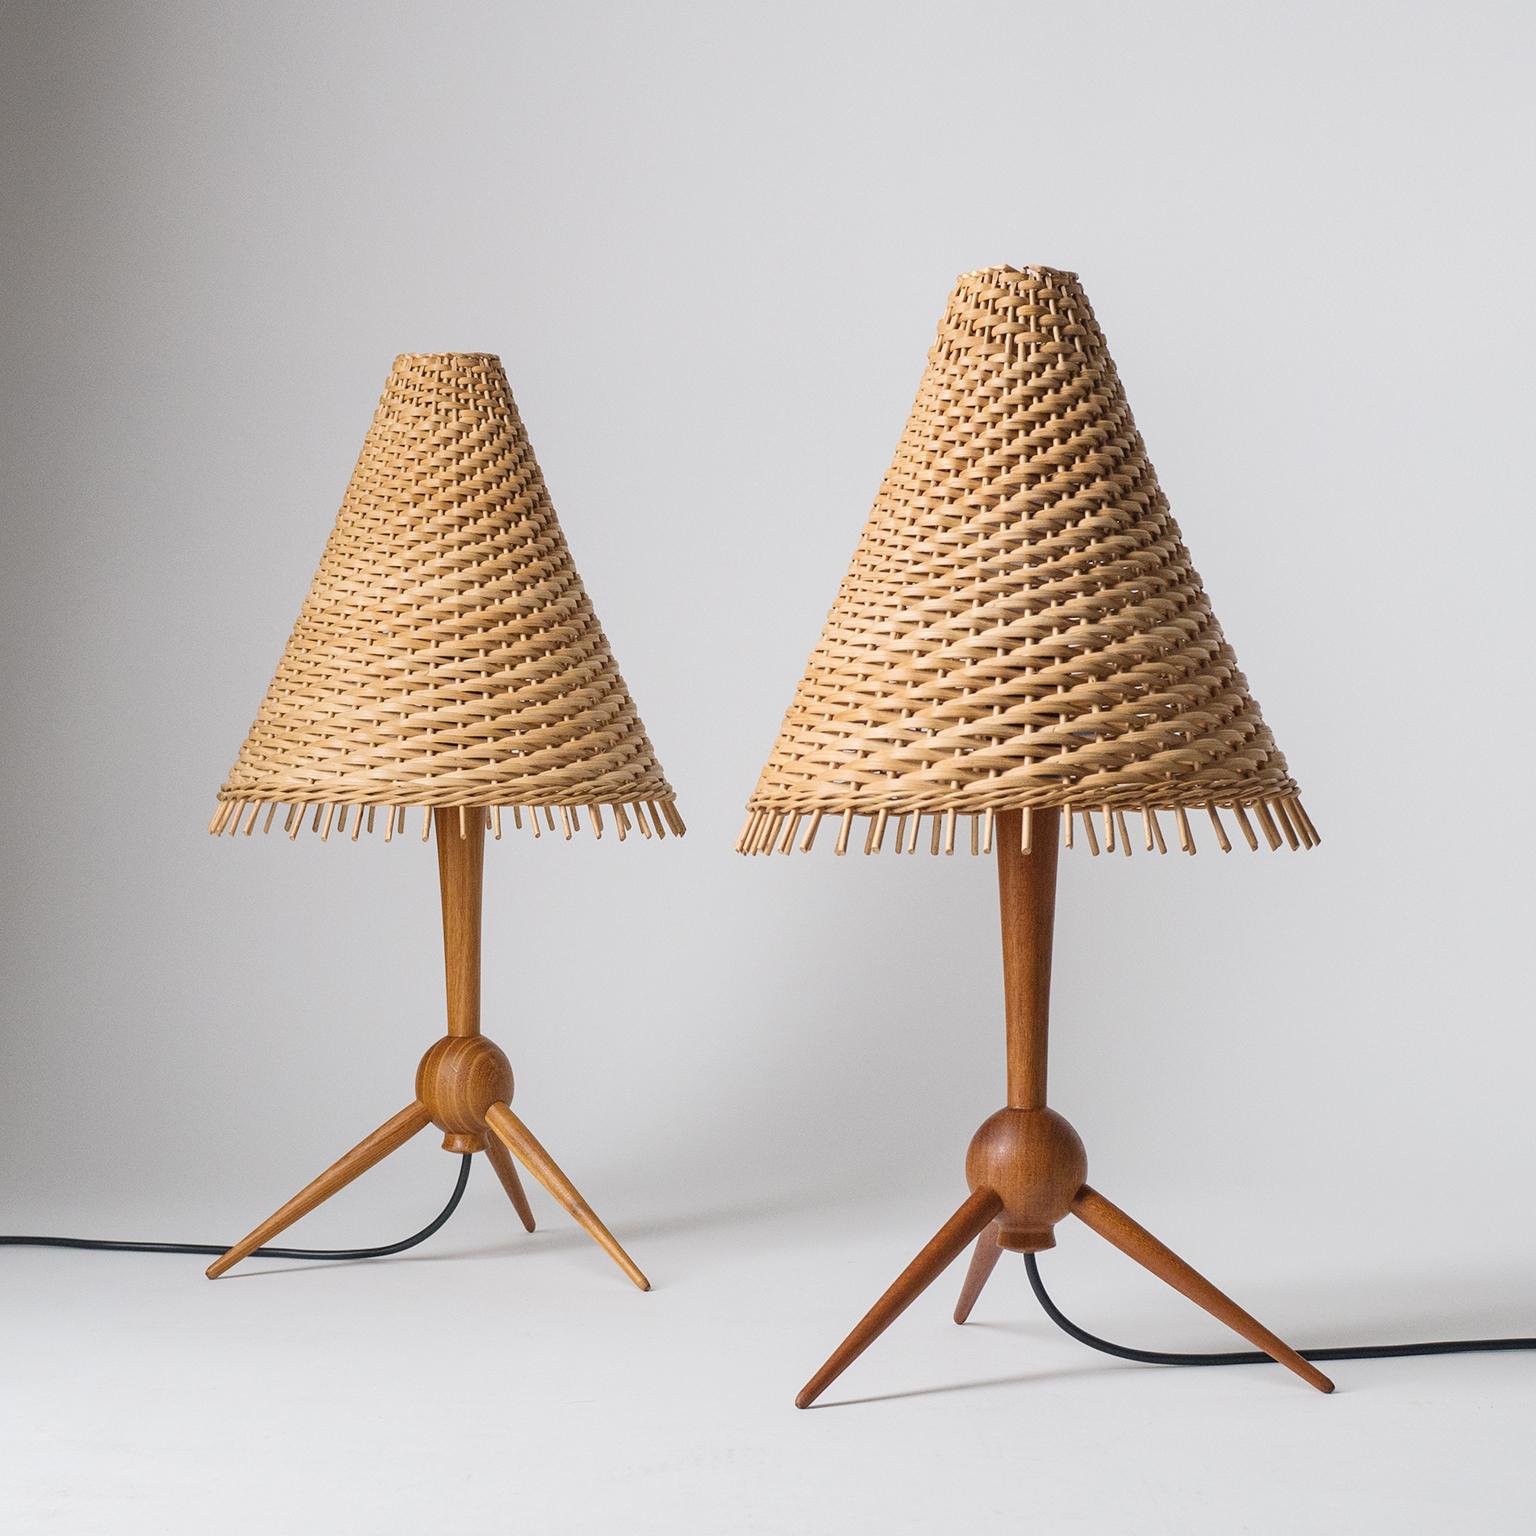 Rare pair of Scandinavian tripod table lamps in teak with rattan shades. Lovely delicate design with tapered teak stem and legs and organic rattan shades that sit atop a wireframe which is mounted onto the bulb. Fine original condition with minor